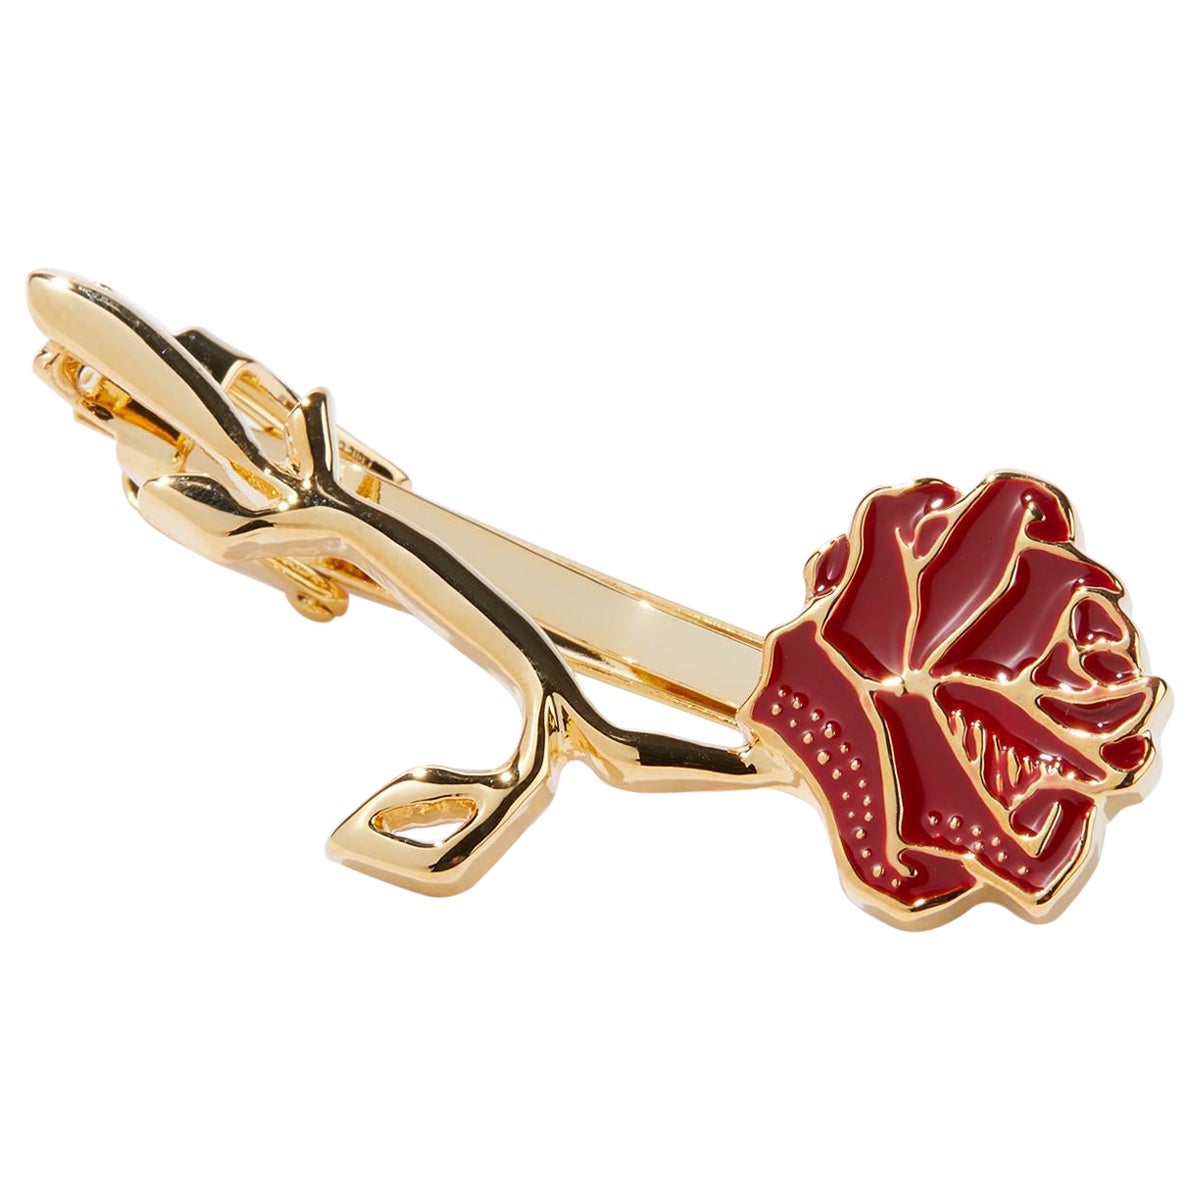 Burgundy Bliss, Glossy Lacquer Finish Tie Clip Dipped in 24k Gold For Sale